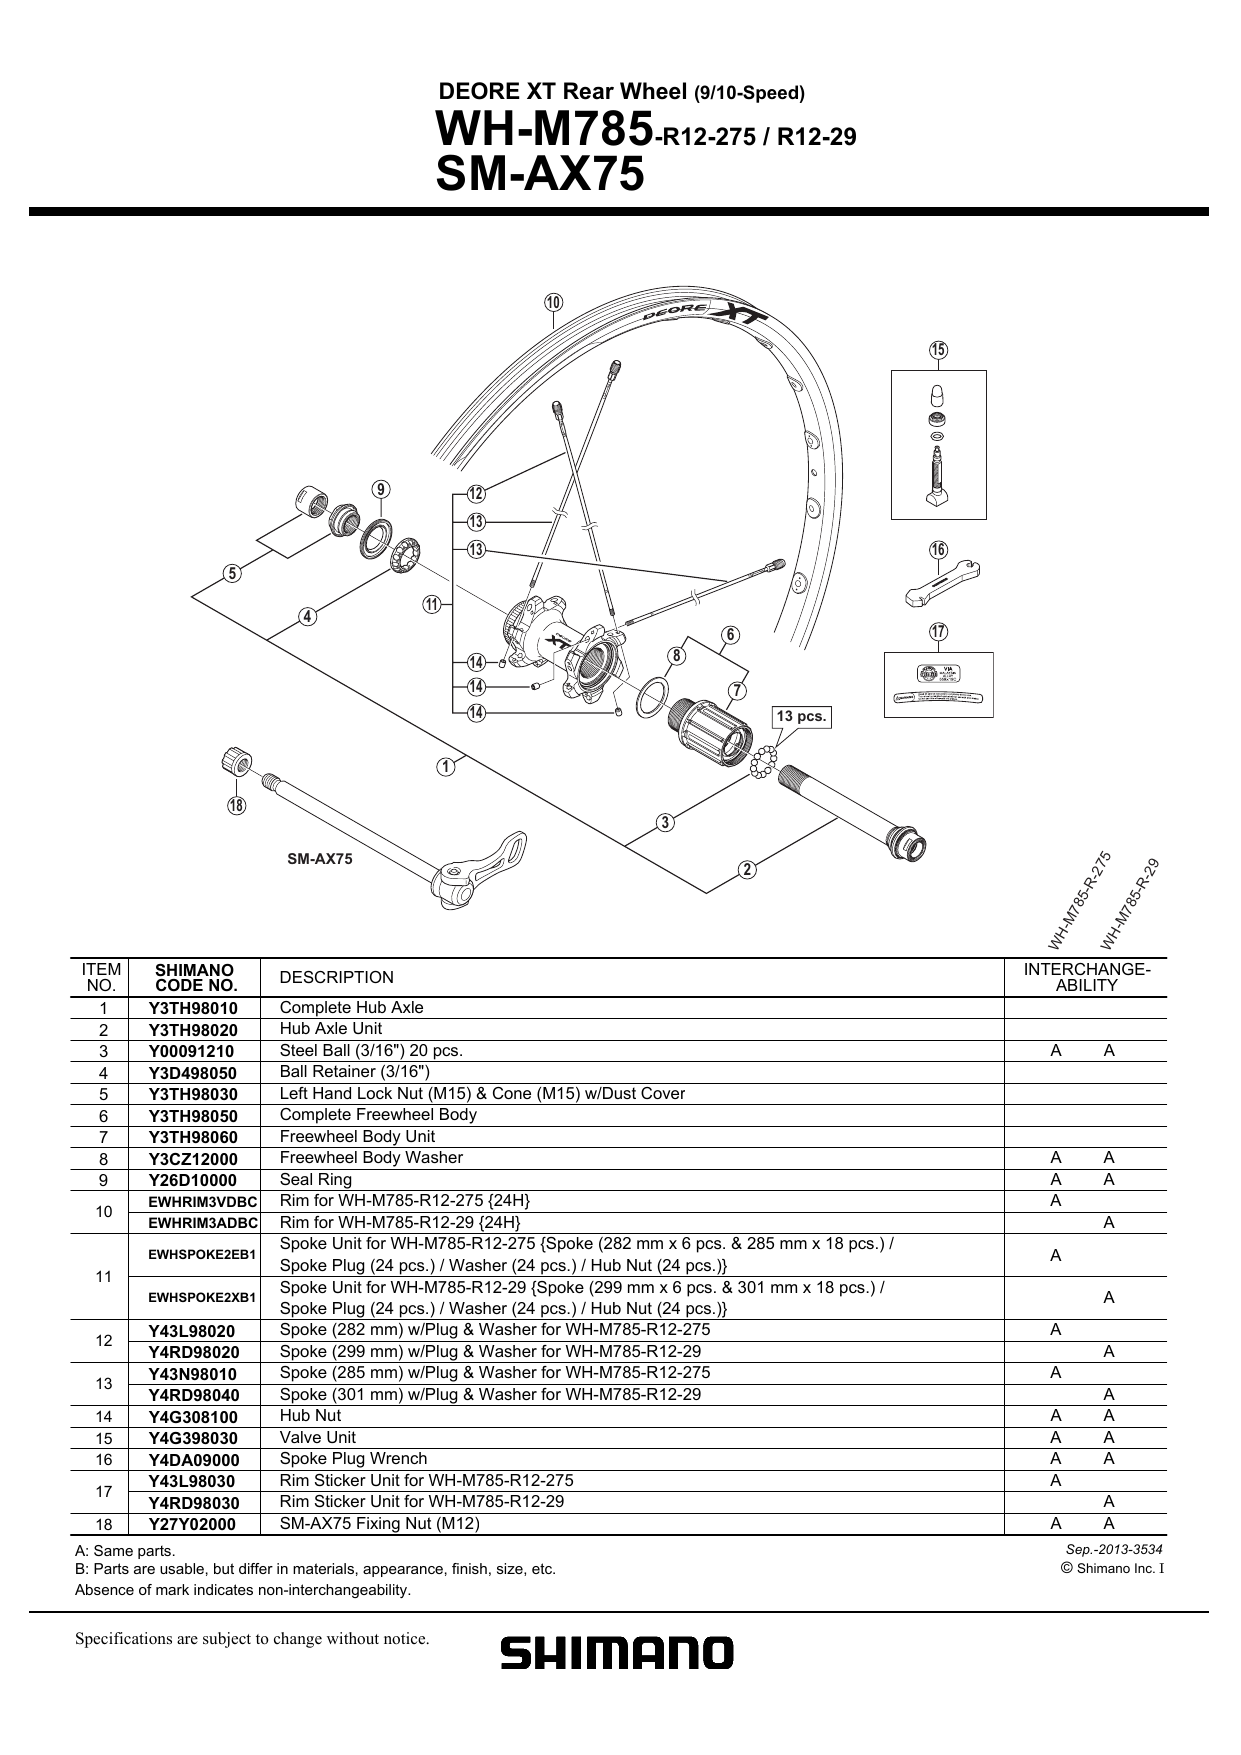 Shimano WH-M785-R12-275 Roda Exploded View | Manualzz